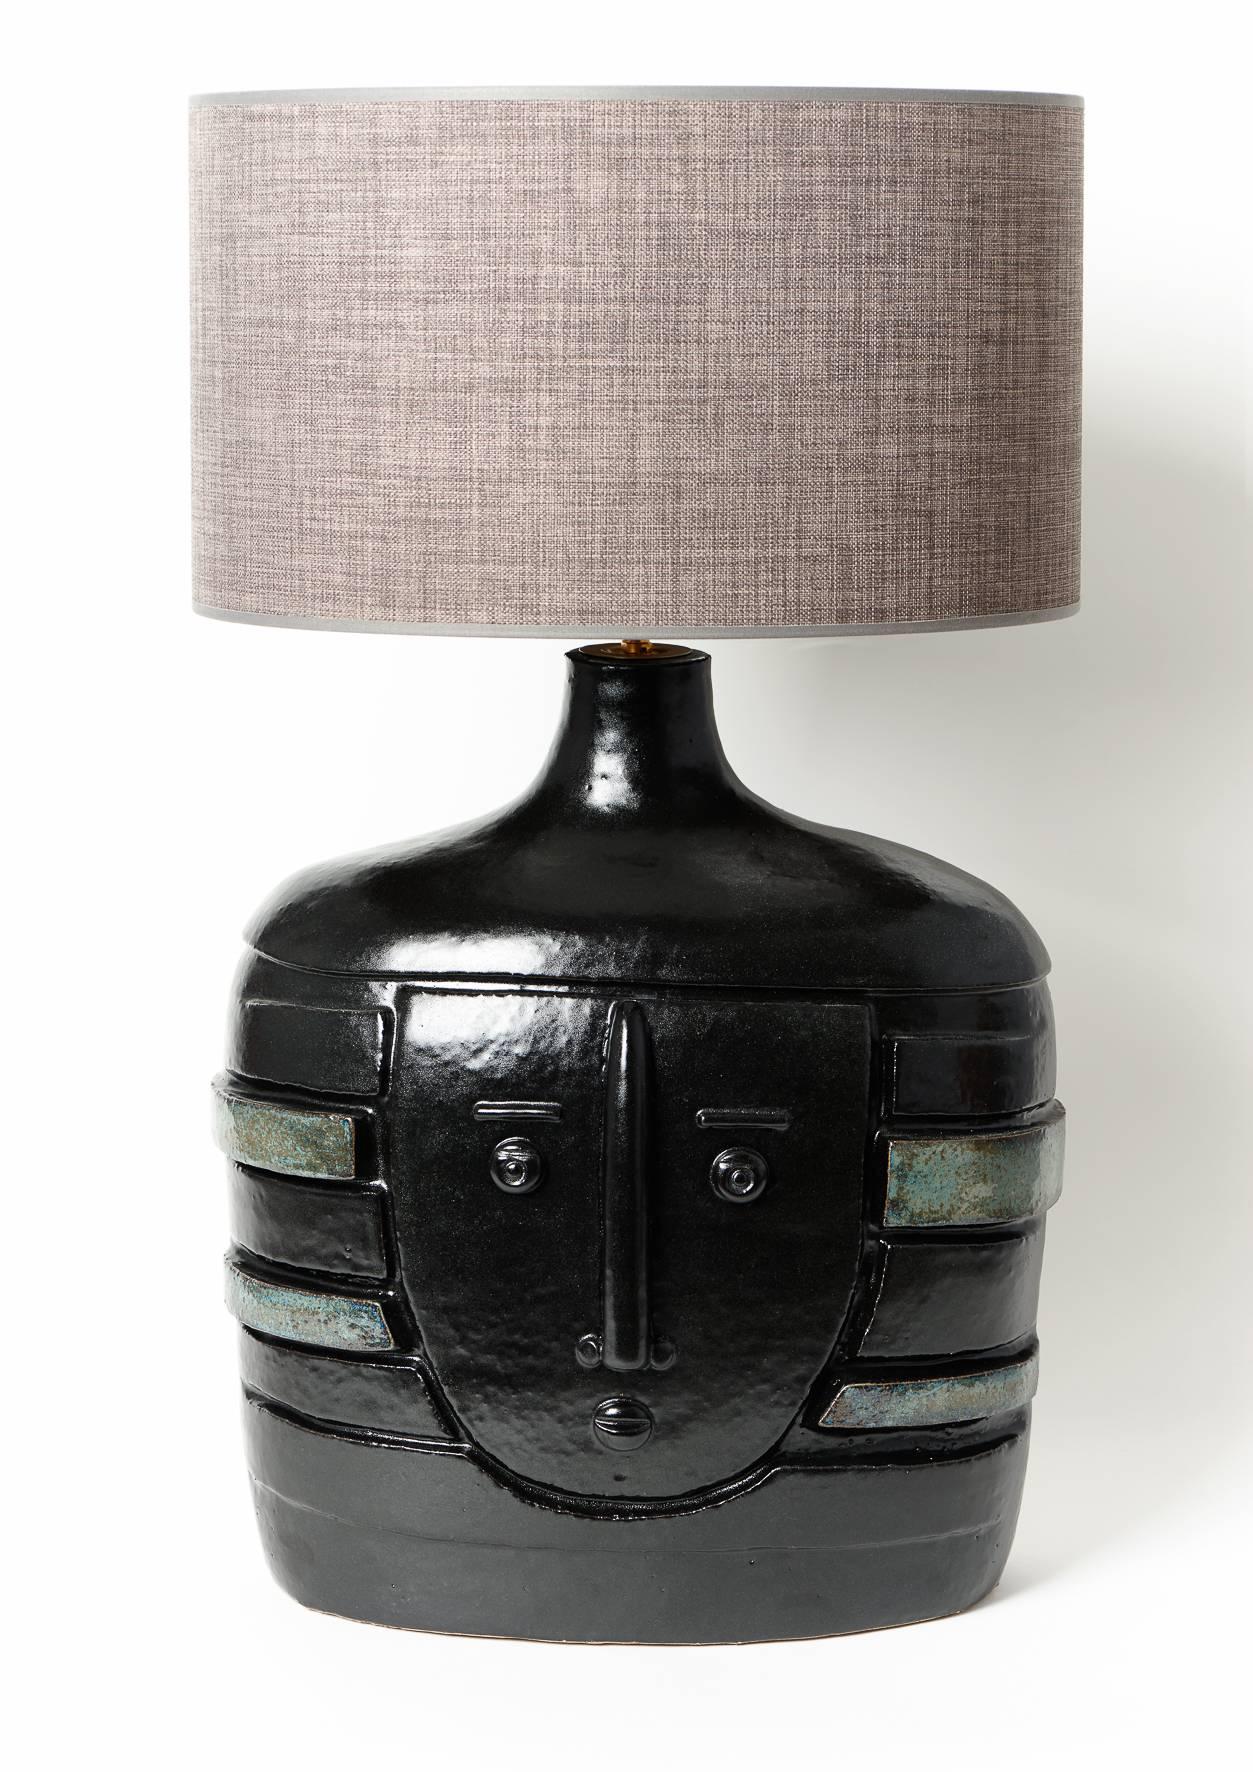 Large hand-sculpted ceramic lamp base, stoneware glazed in shiny black, decorated with a biomorphic visage sculpted and incised, and green stripes on sides.
One of a kind handmade piece signed by the French ceramicists DALO. 

The height dimension